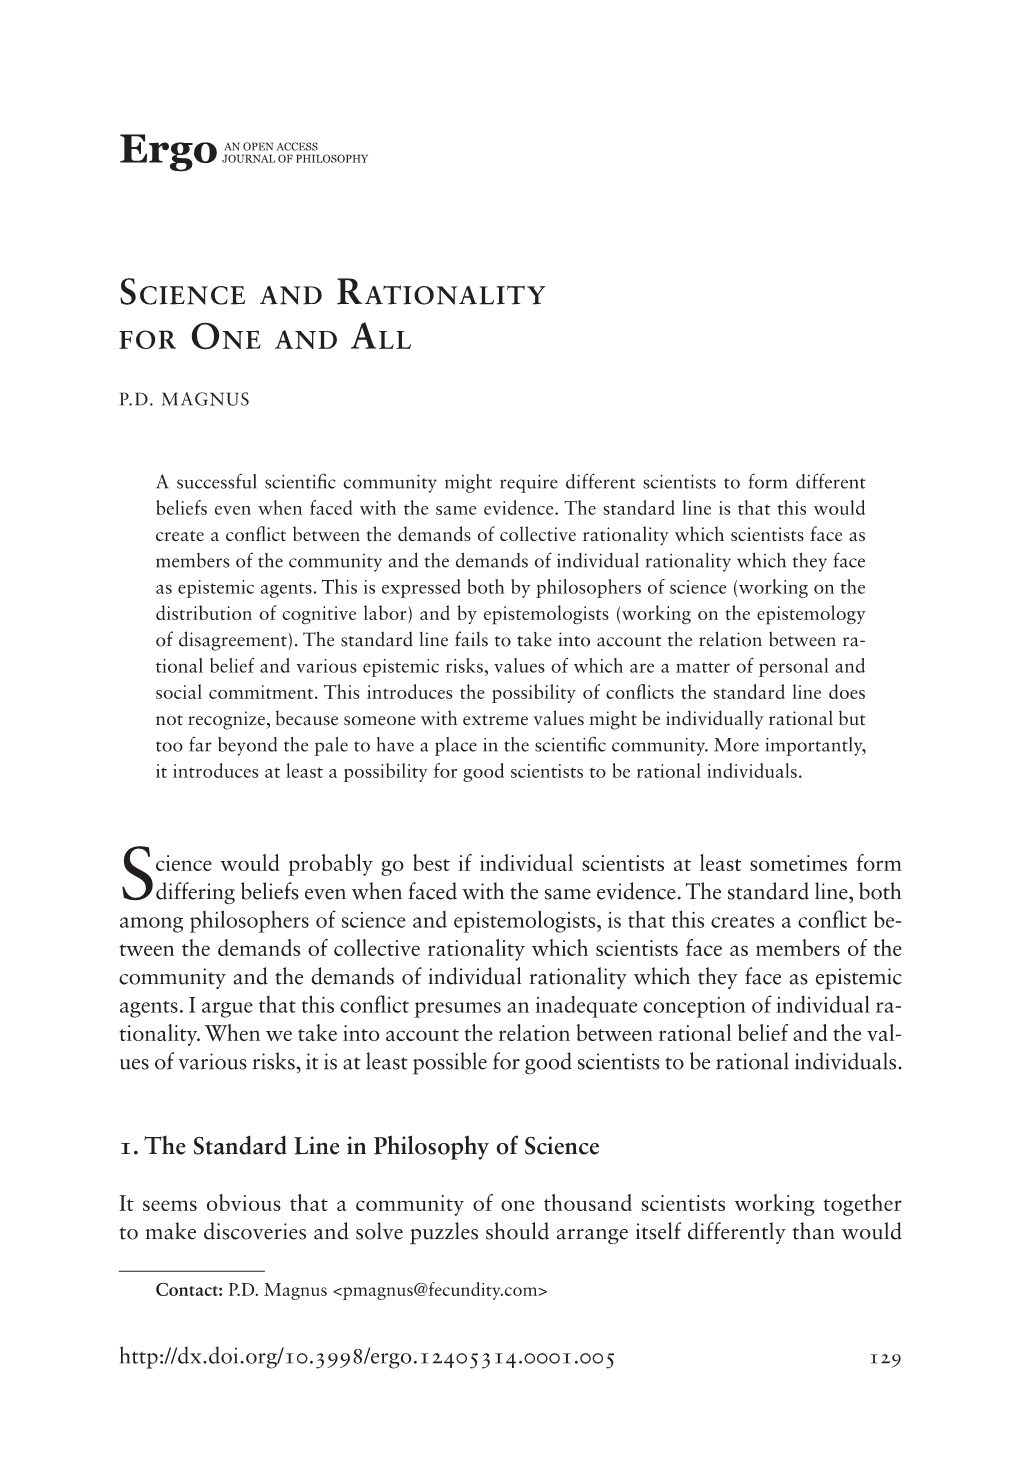 SCIENCE and RATIONALITY for ONE and ALL 1. the Standard Line in Philosophy of Science